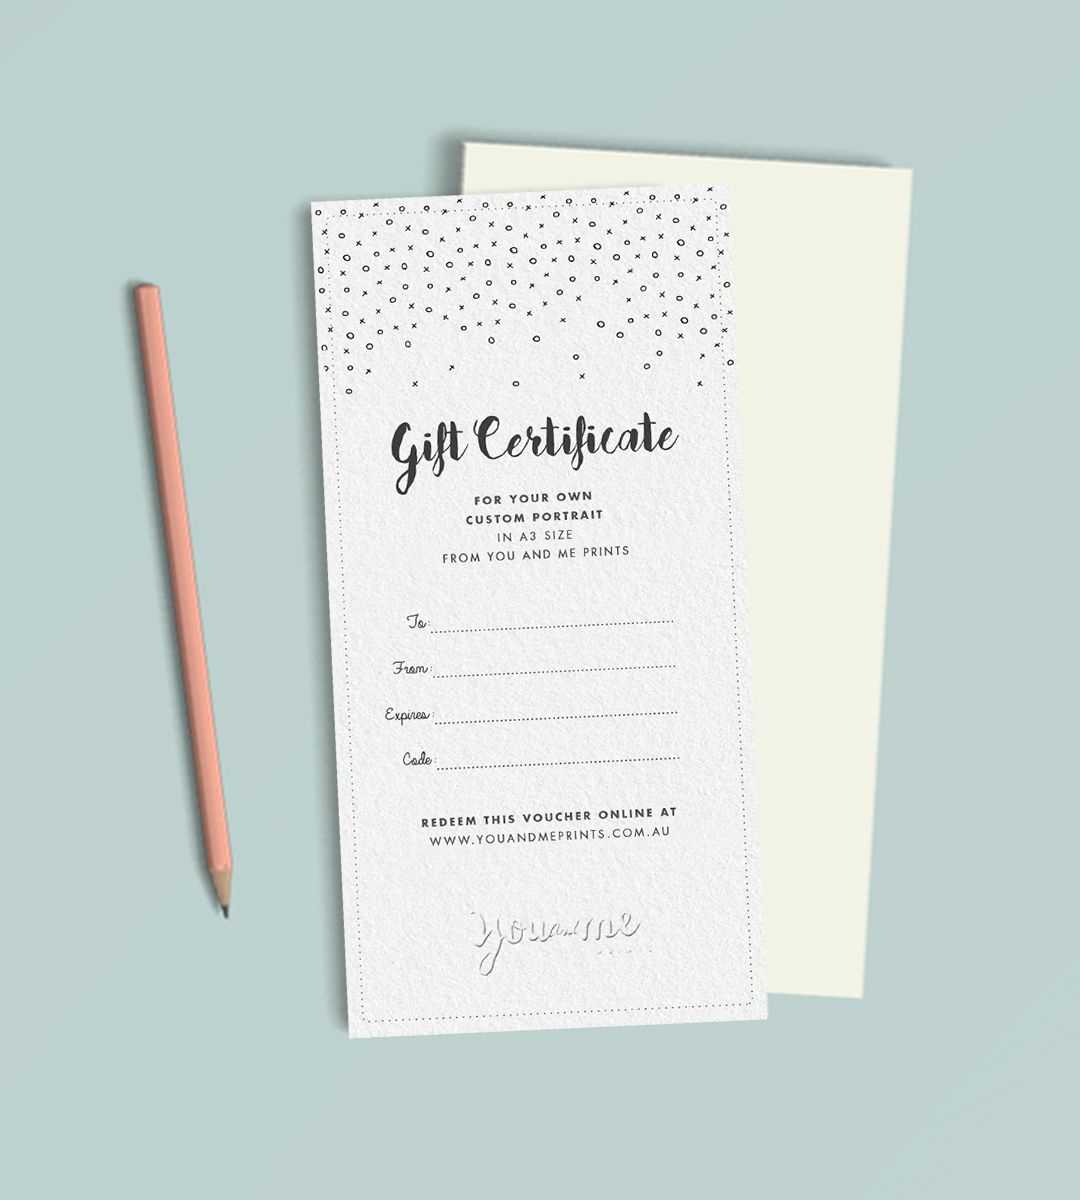 Gift Voucher | Gift Voucher Design, Gift Vouchers, Gift Throughout Custom Gift Certificate Template